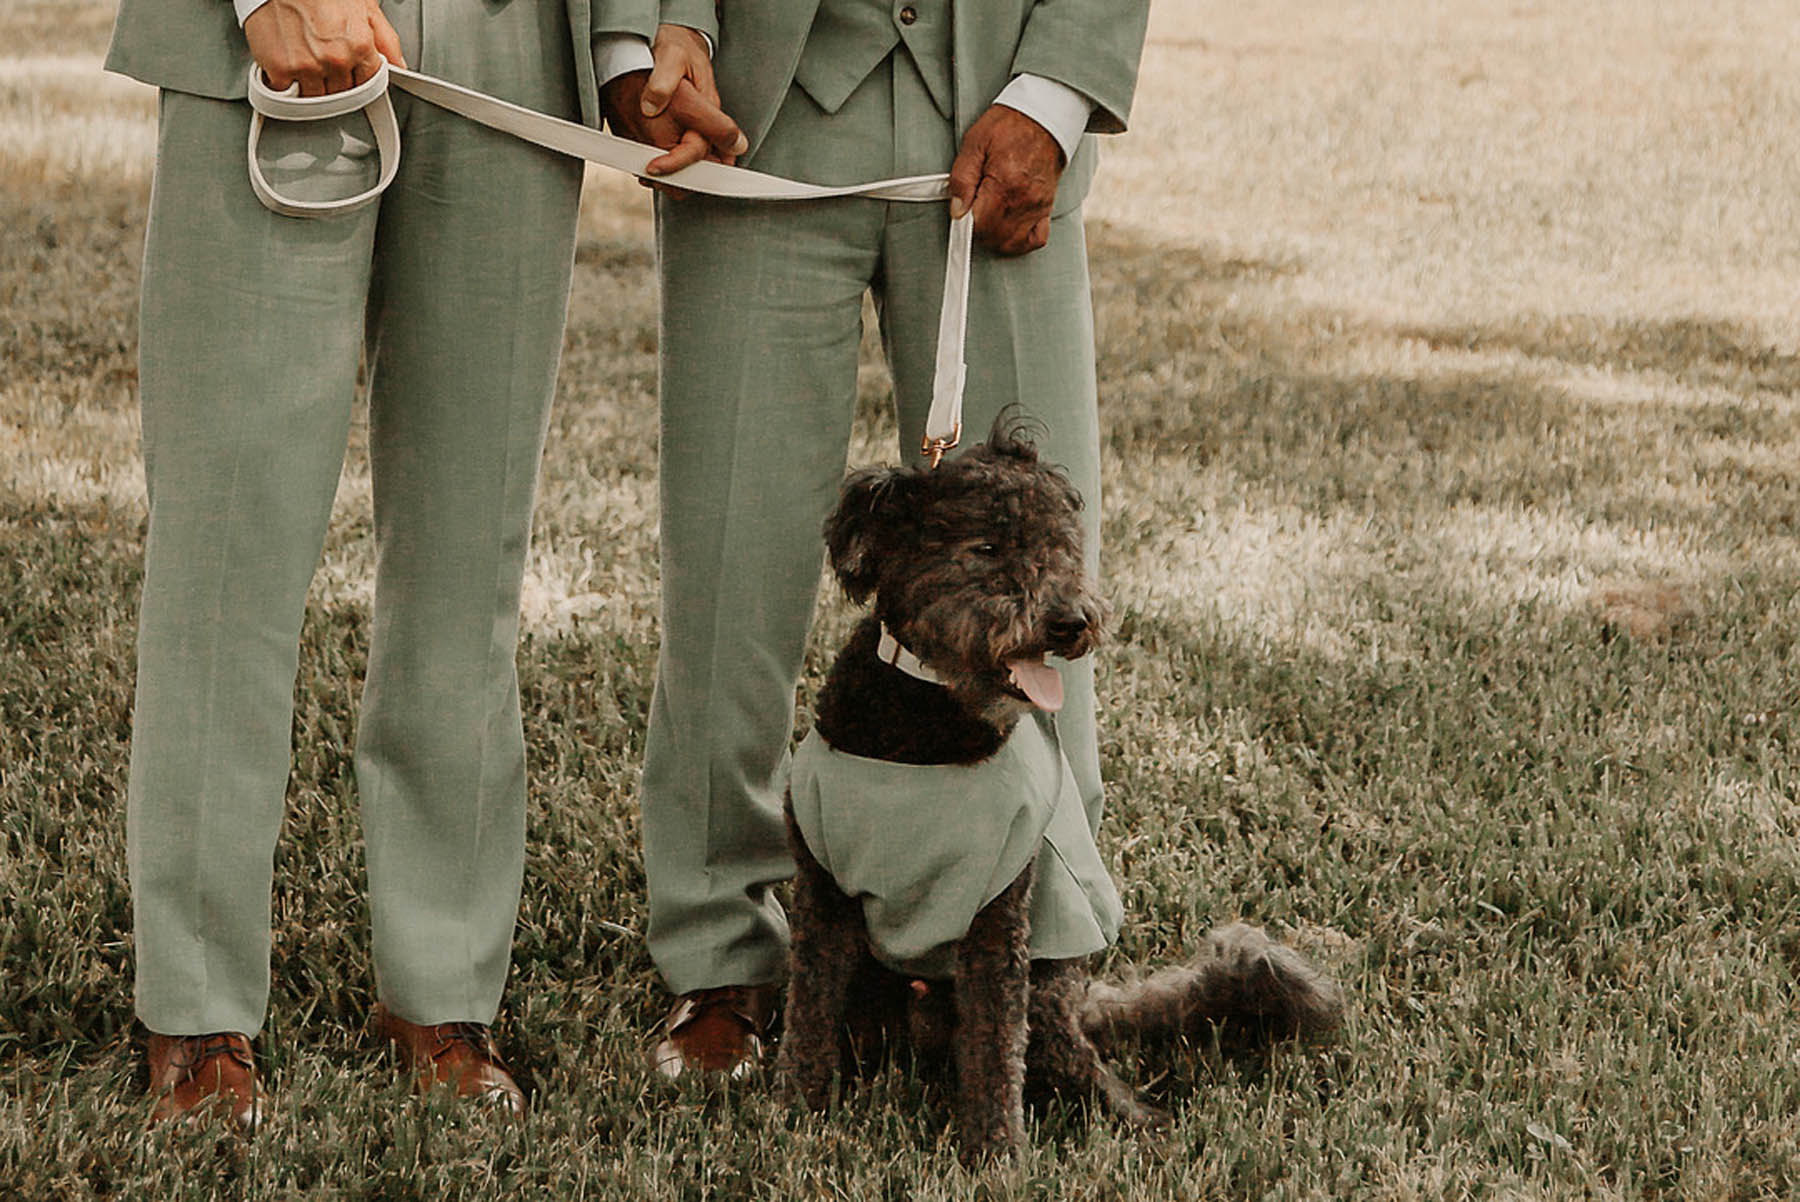 A black fluffy dog sits next to its owners, all wearing matching sage gray suits